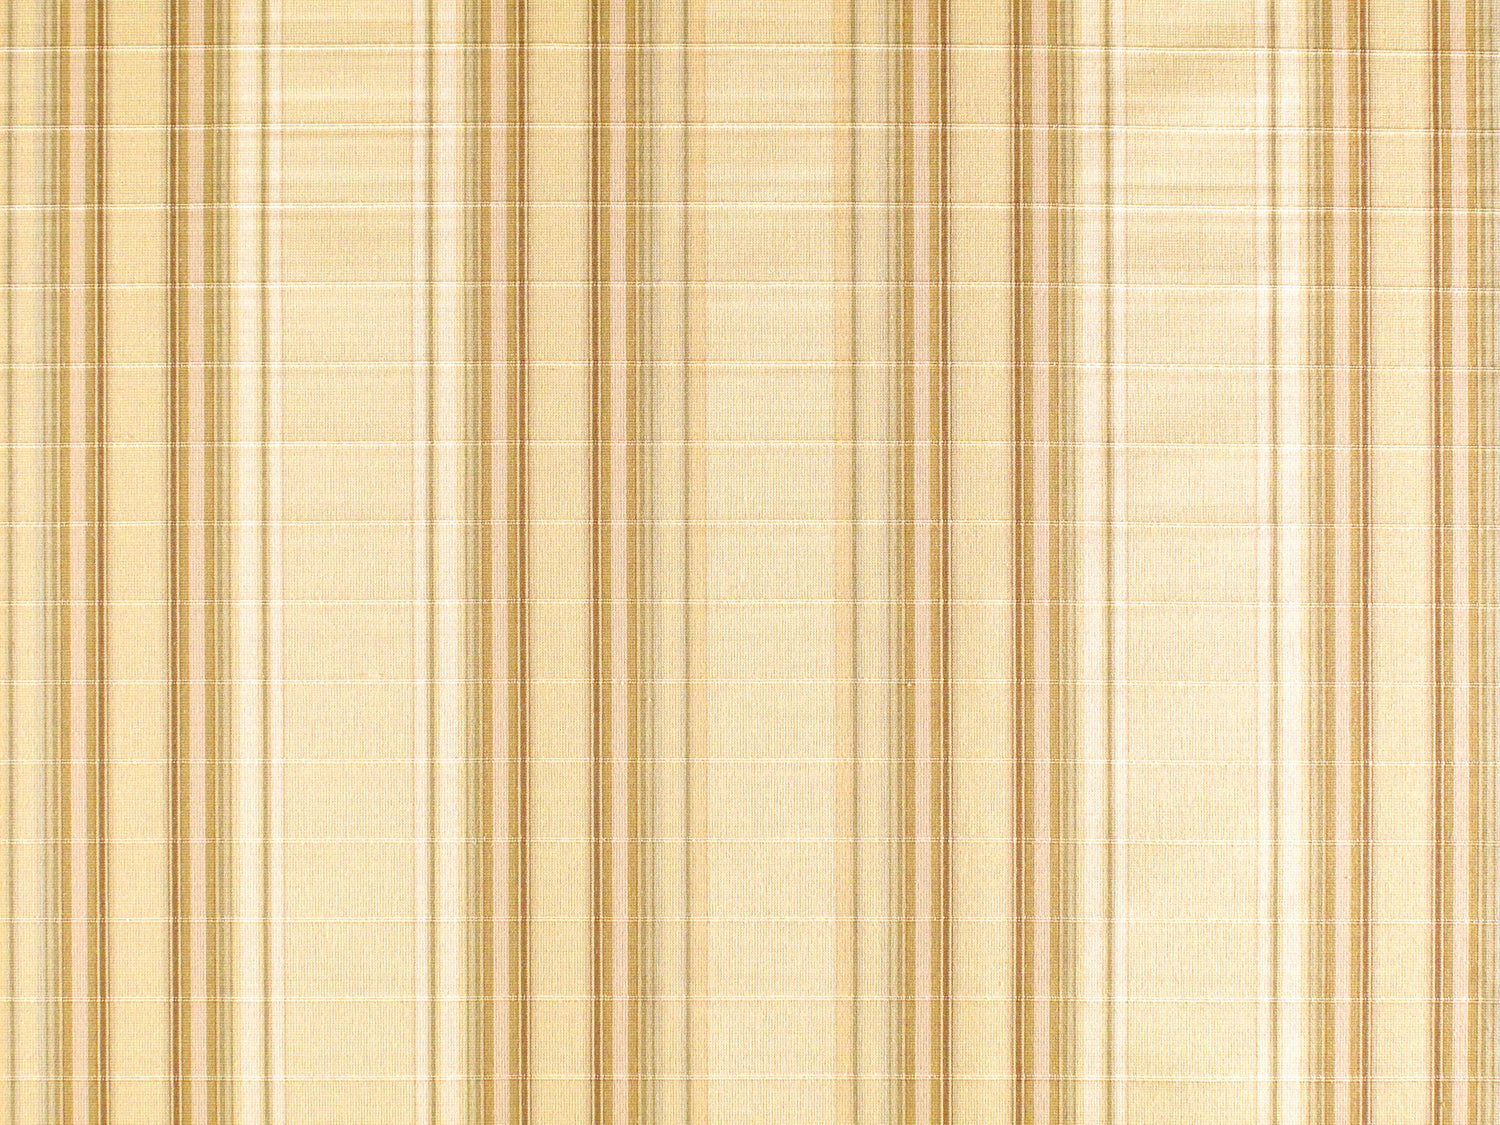 Cordina Stripe fabric in tan color - pattern number DY 00010211 - by Scalamandre in the Old World Weavers collection